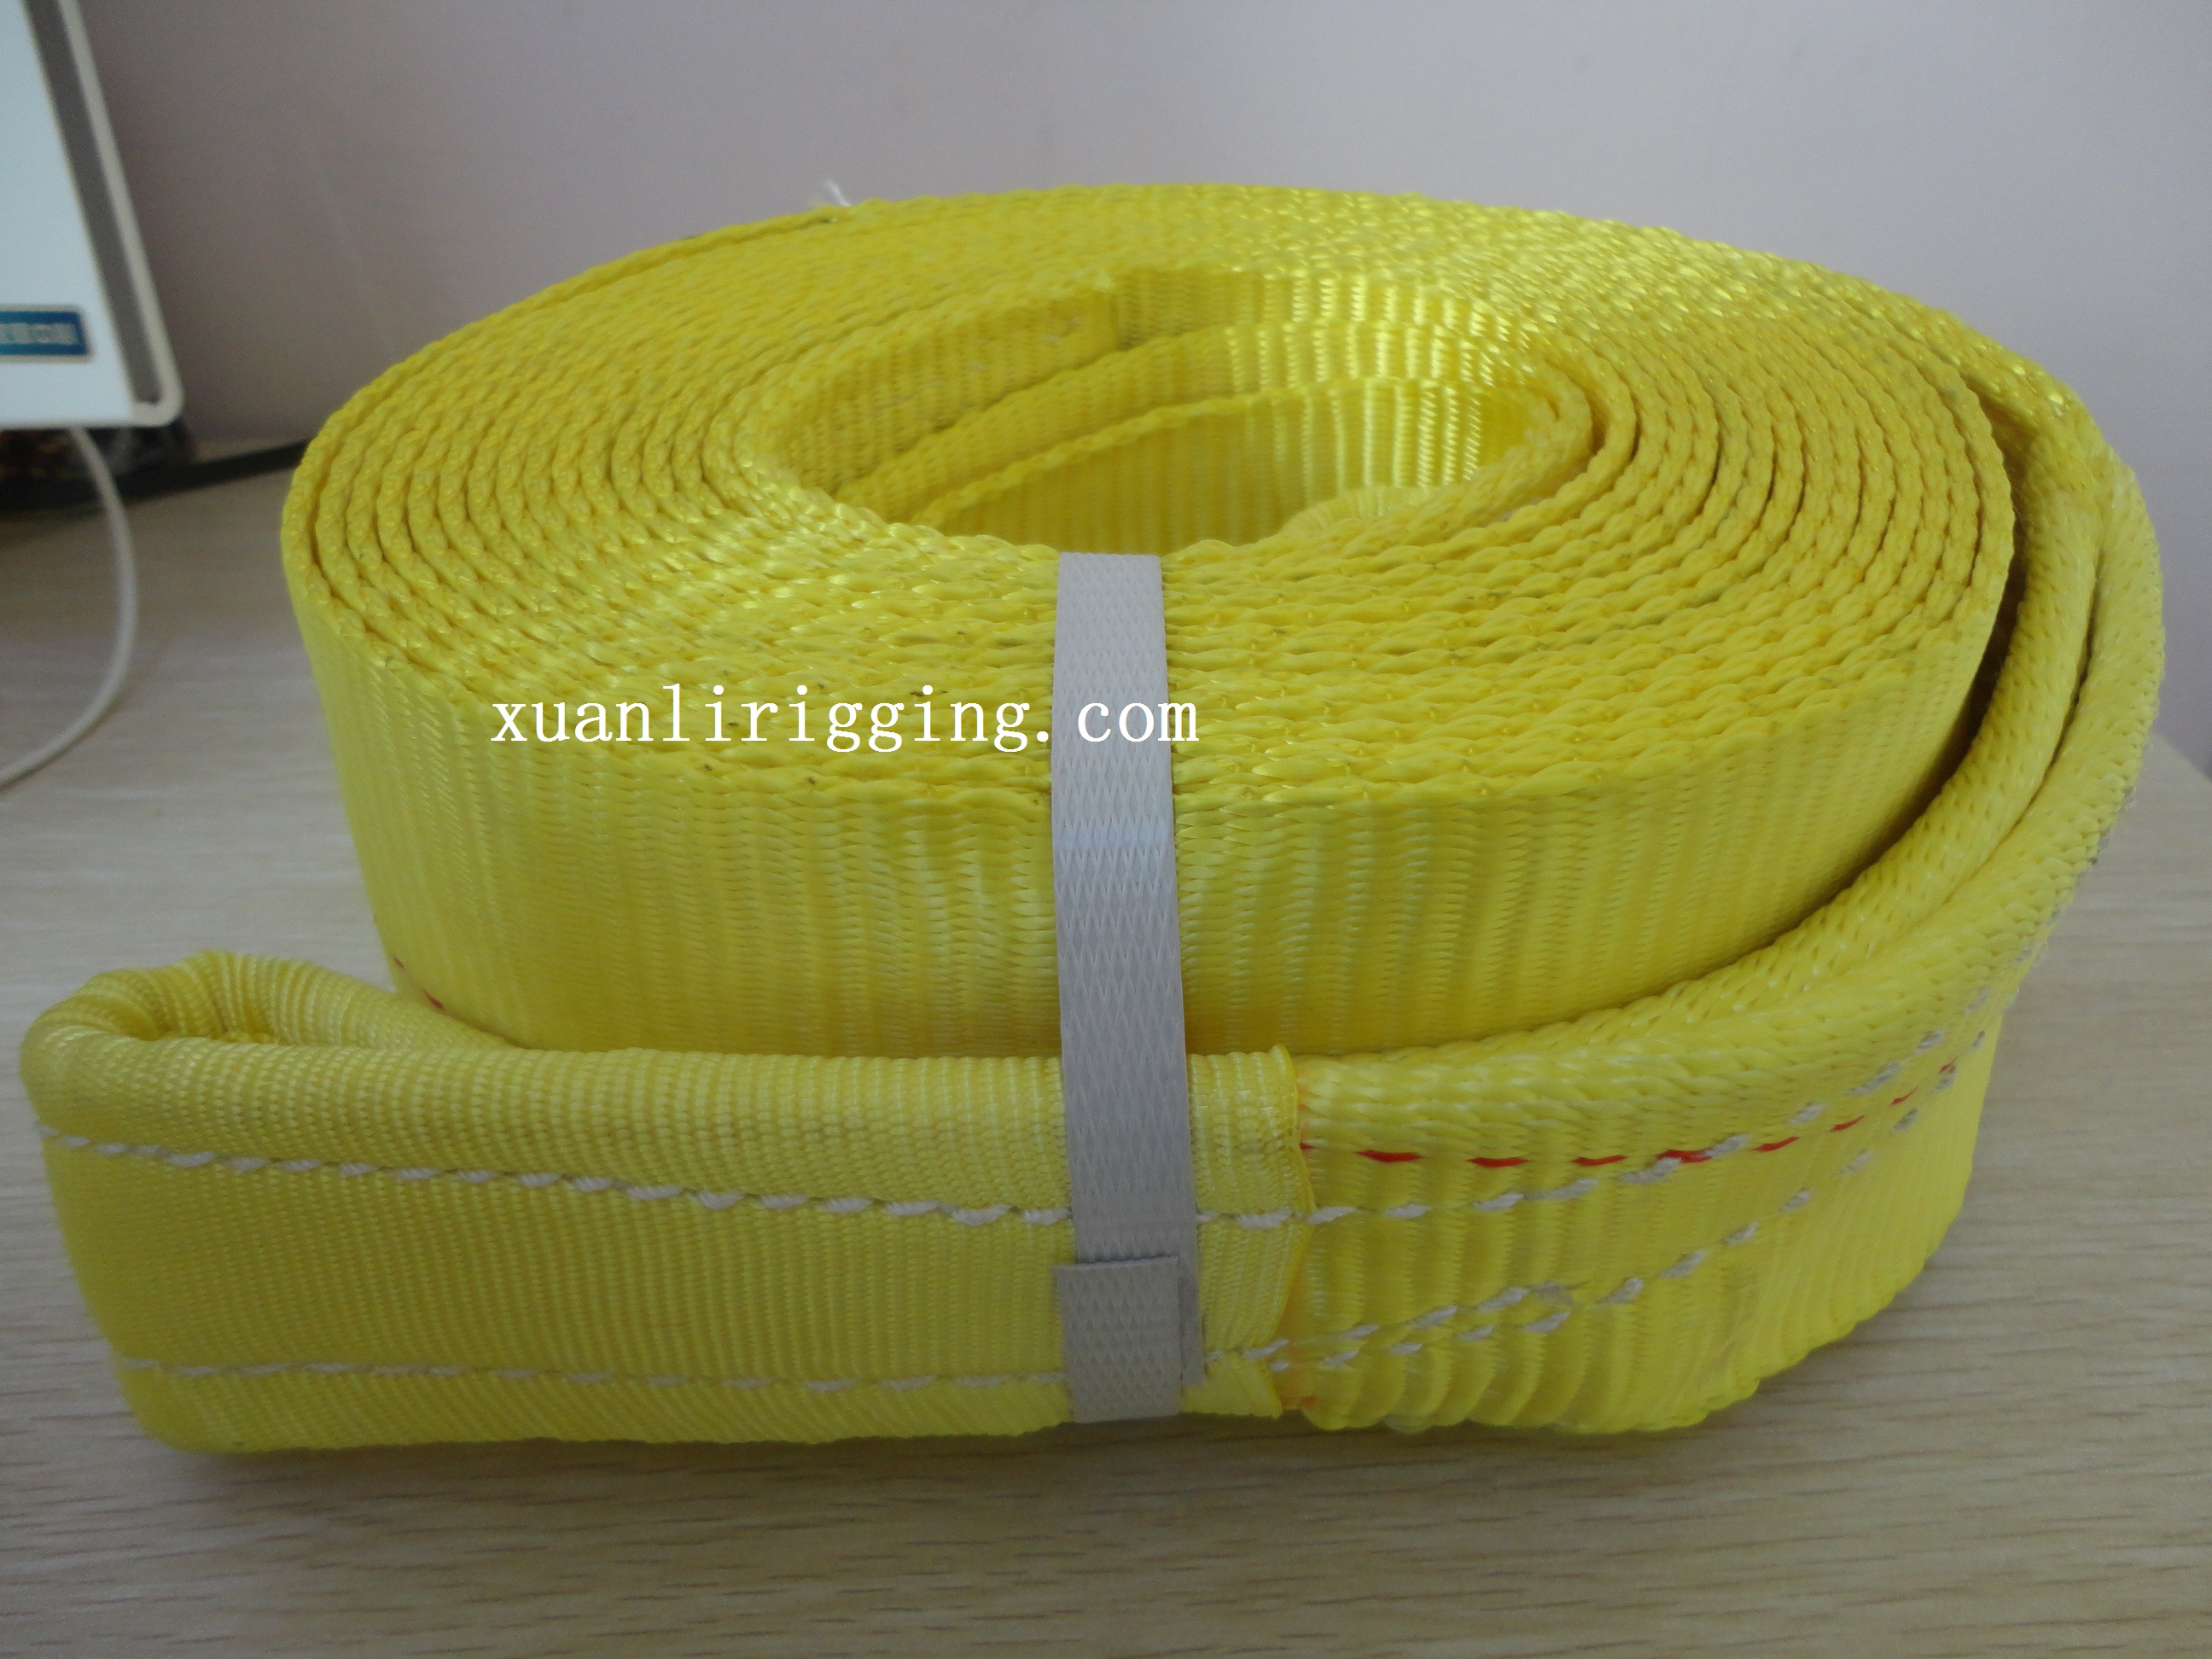 recovery strap 15000kg